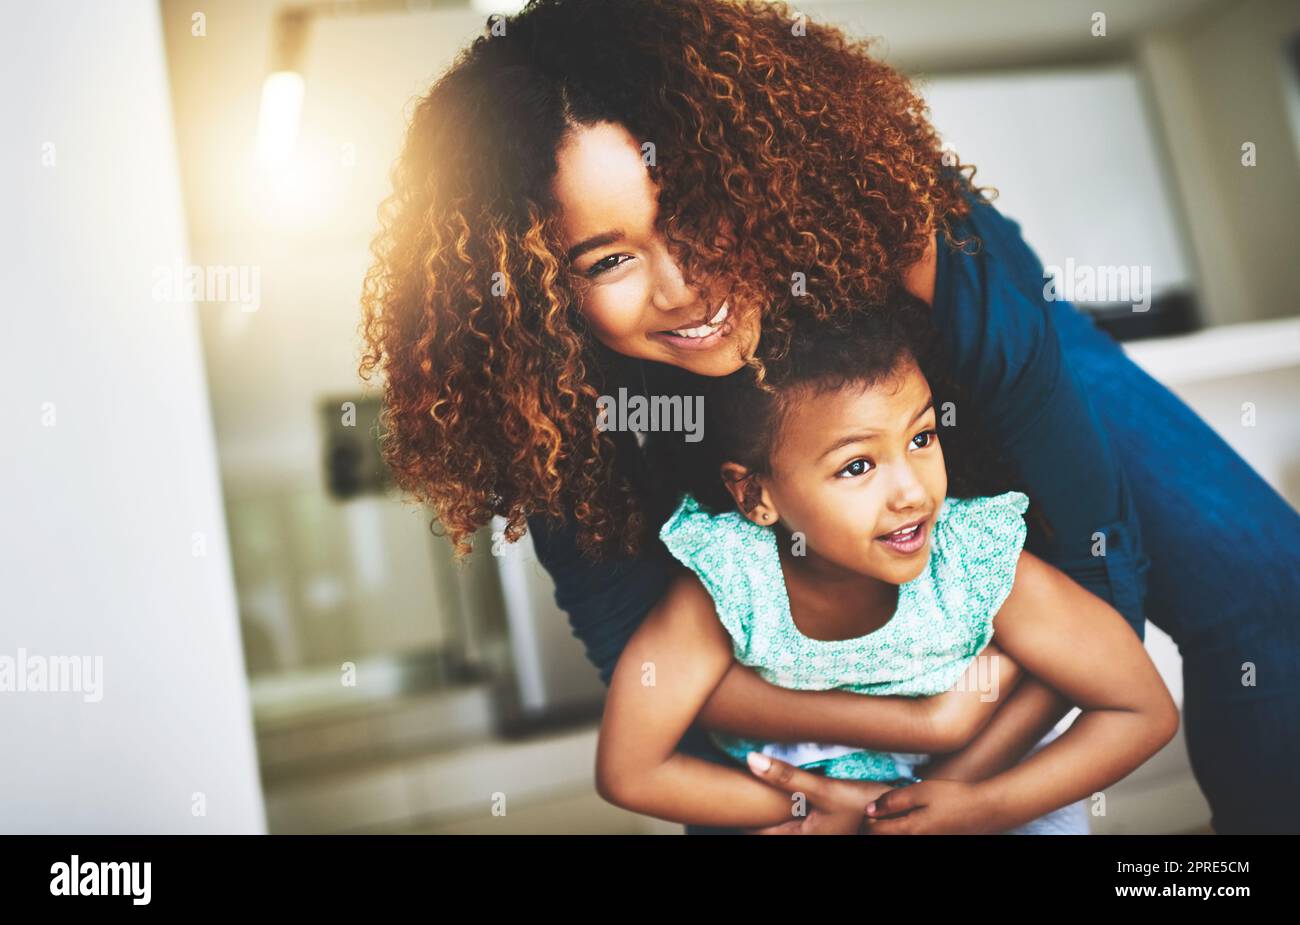 Motherhood is knowing joy. a young mother and her daughter spending quality time together at home. Stock Photo